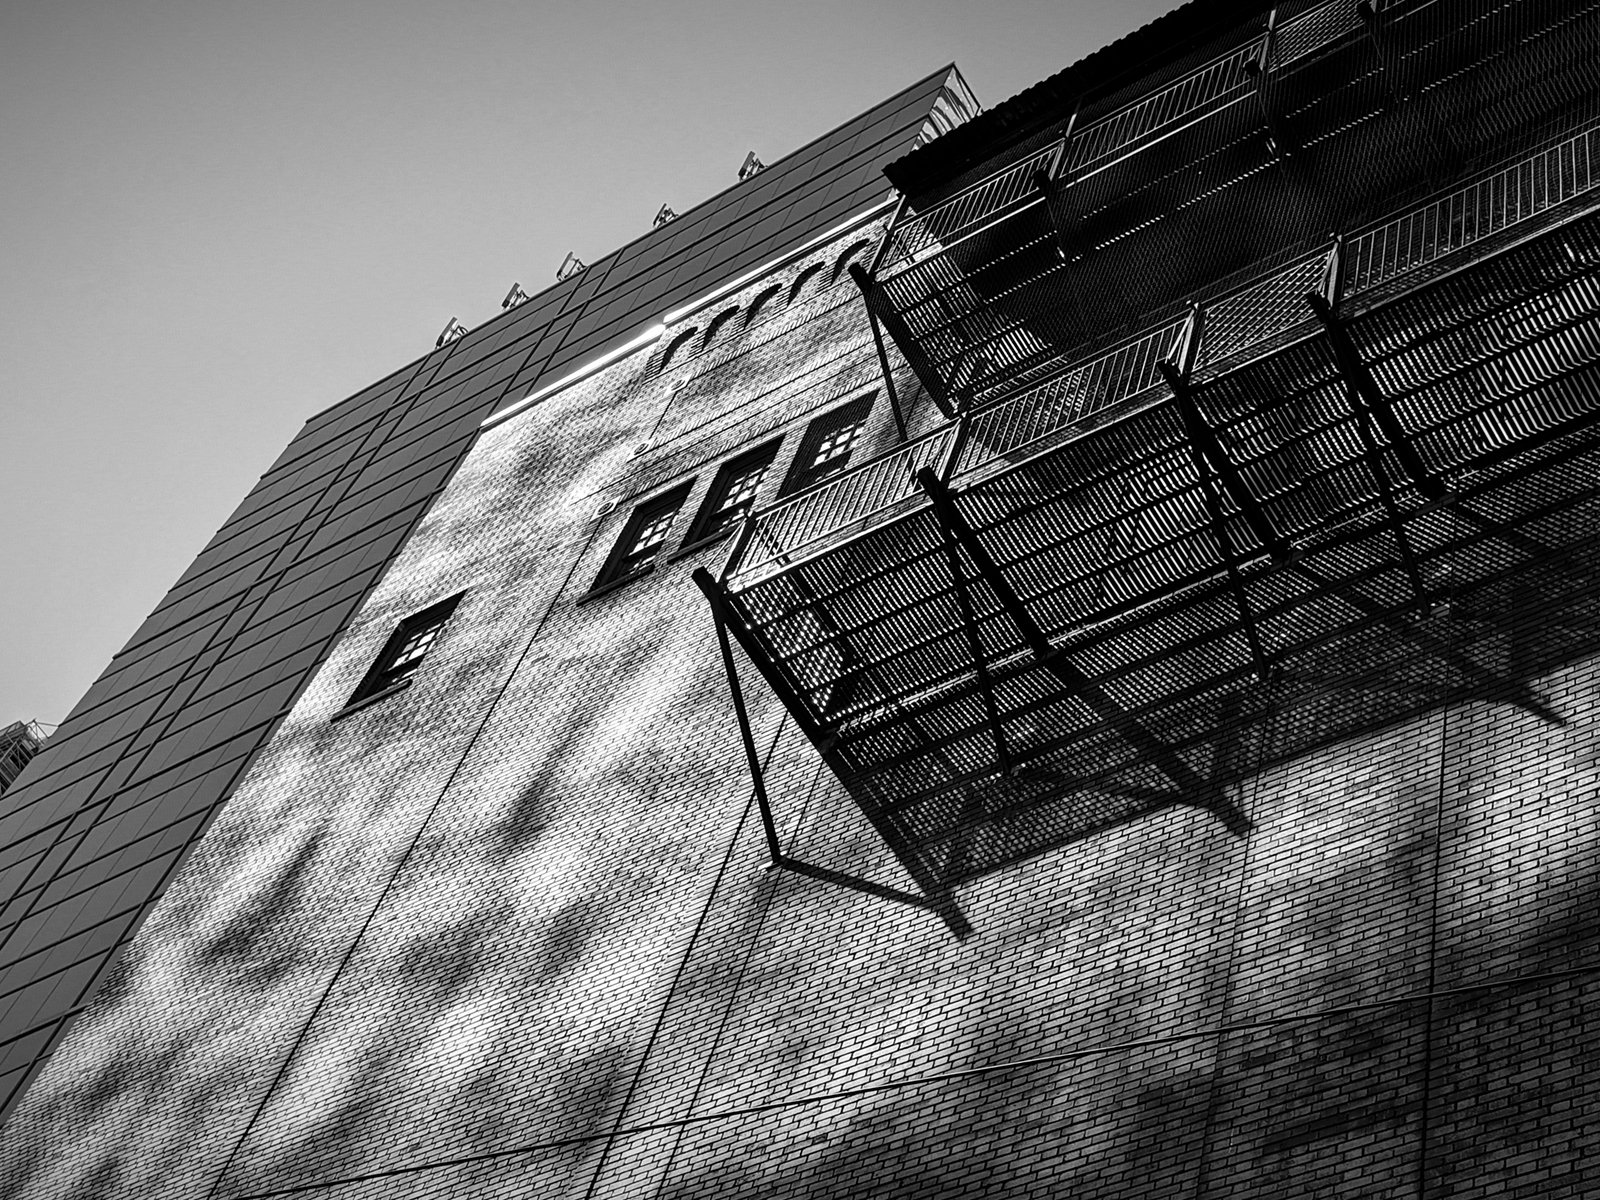 Black and white photo of a tall building with a textured facade, featuring multiple fire escapes and small windows, under a clear sky.